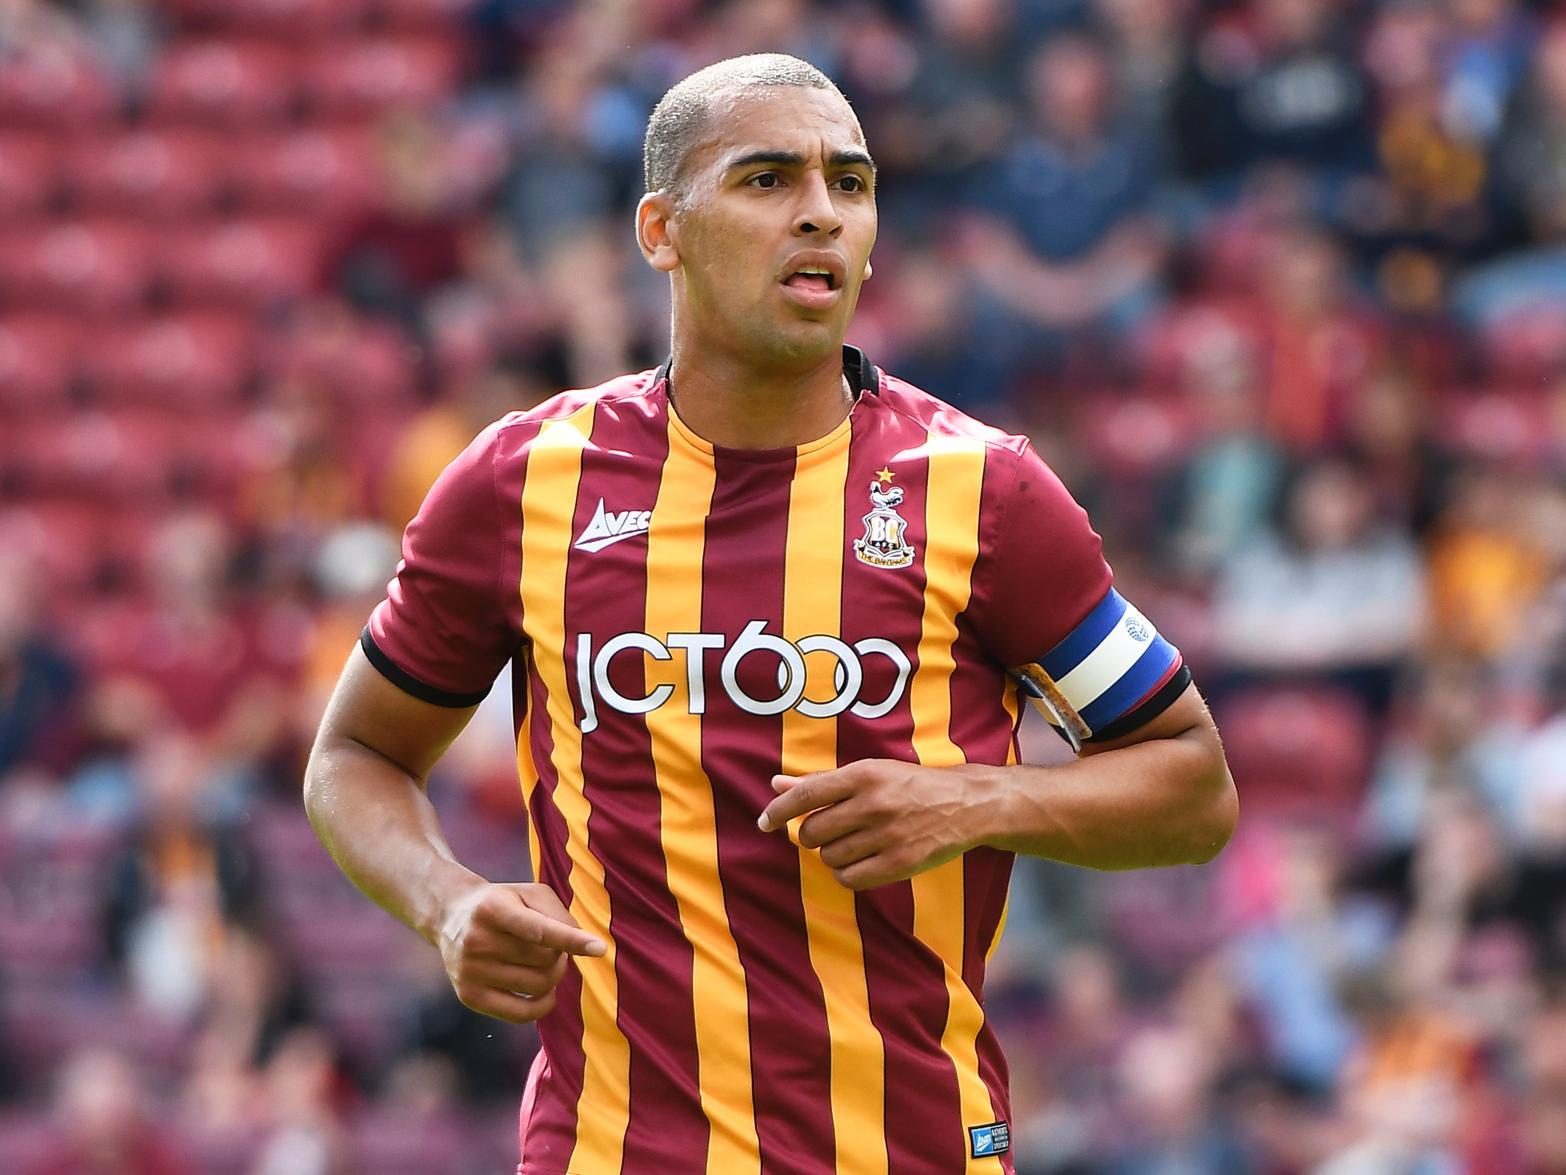 Former Sunderland striker James Vaughan is set for a shock move to League One side Tranmere Rovers. (Shields Gazette)